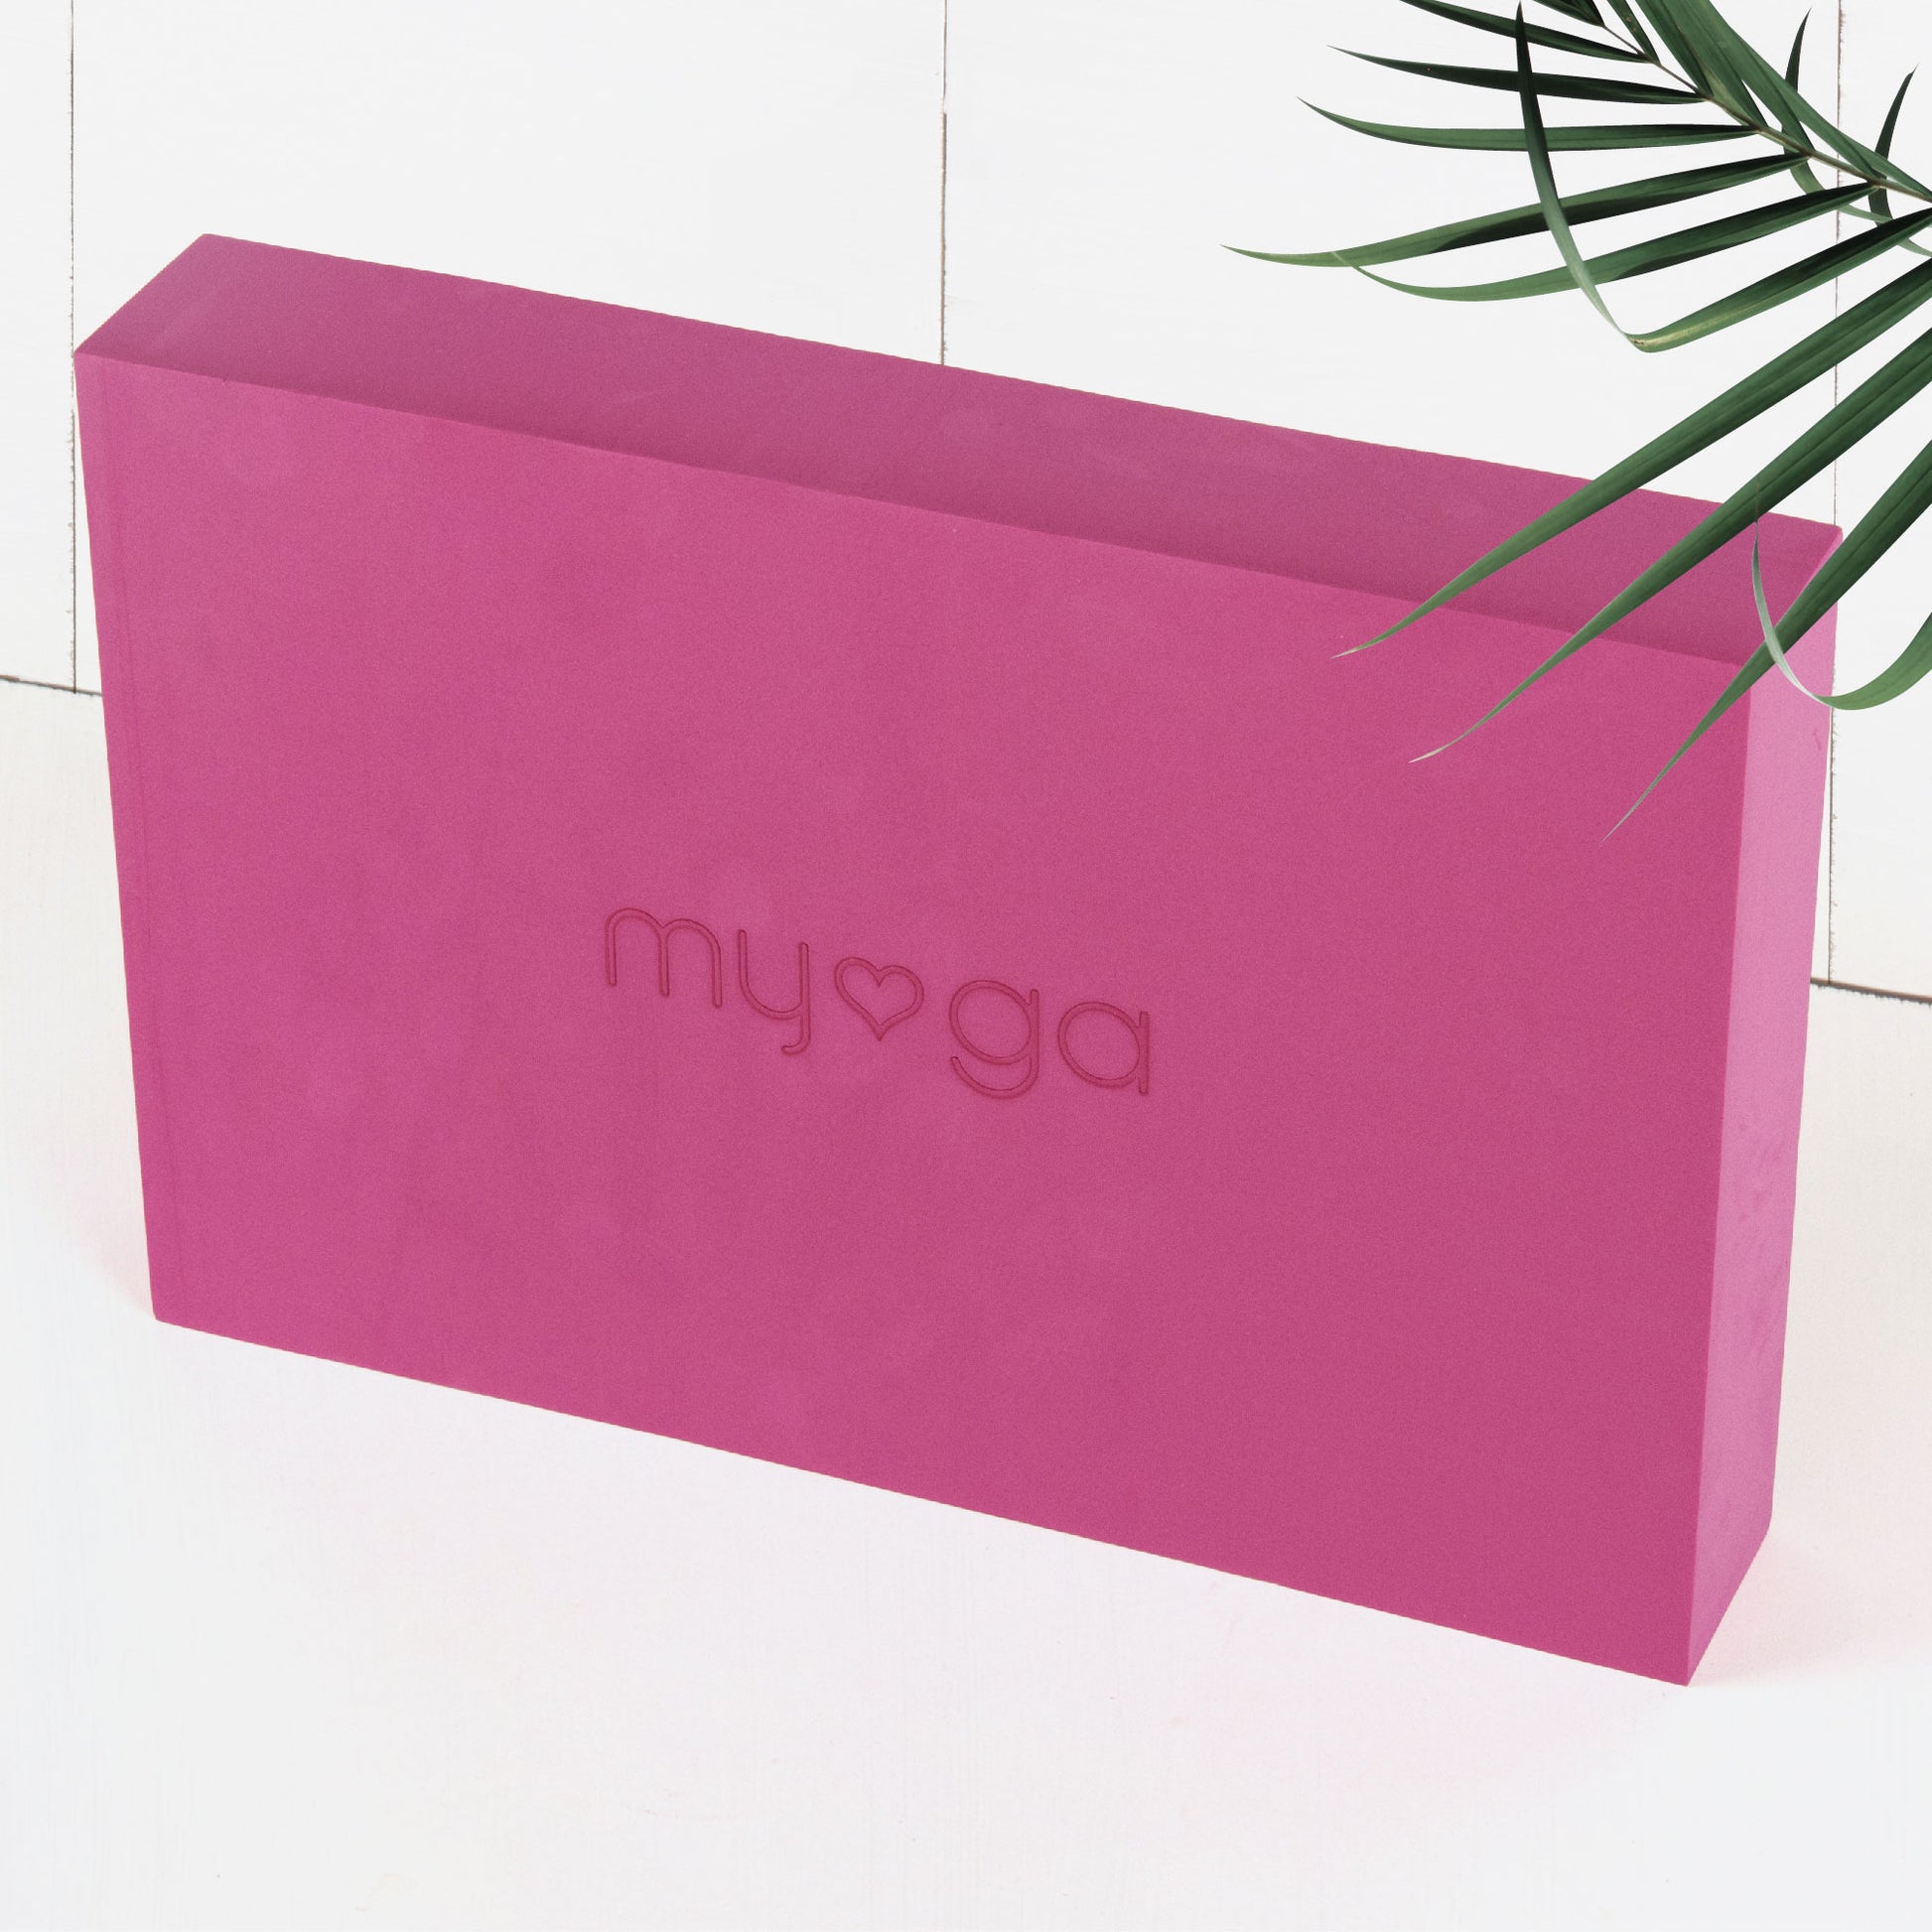 Myga XL Yoga Block - High Density Non-Slip Foam Brick for Yoga, Pilates and  Fitness to Support and Deepen Poses - Purple